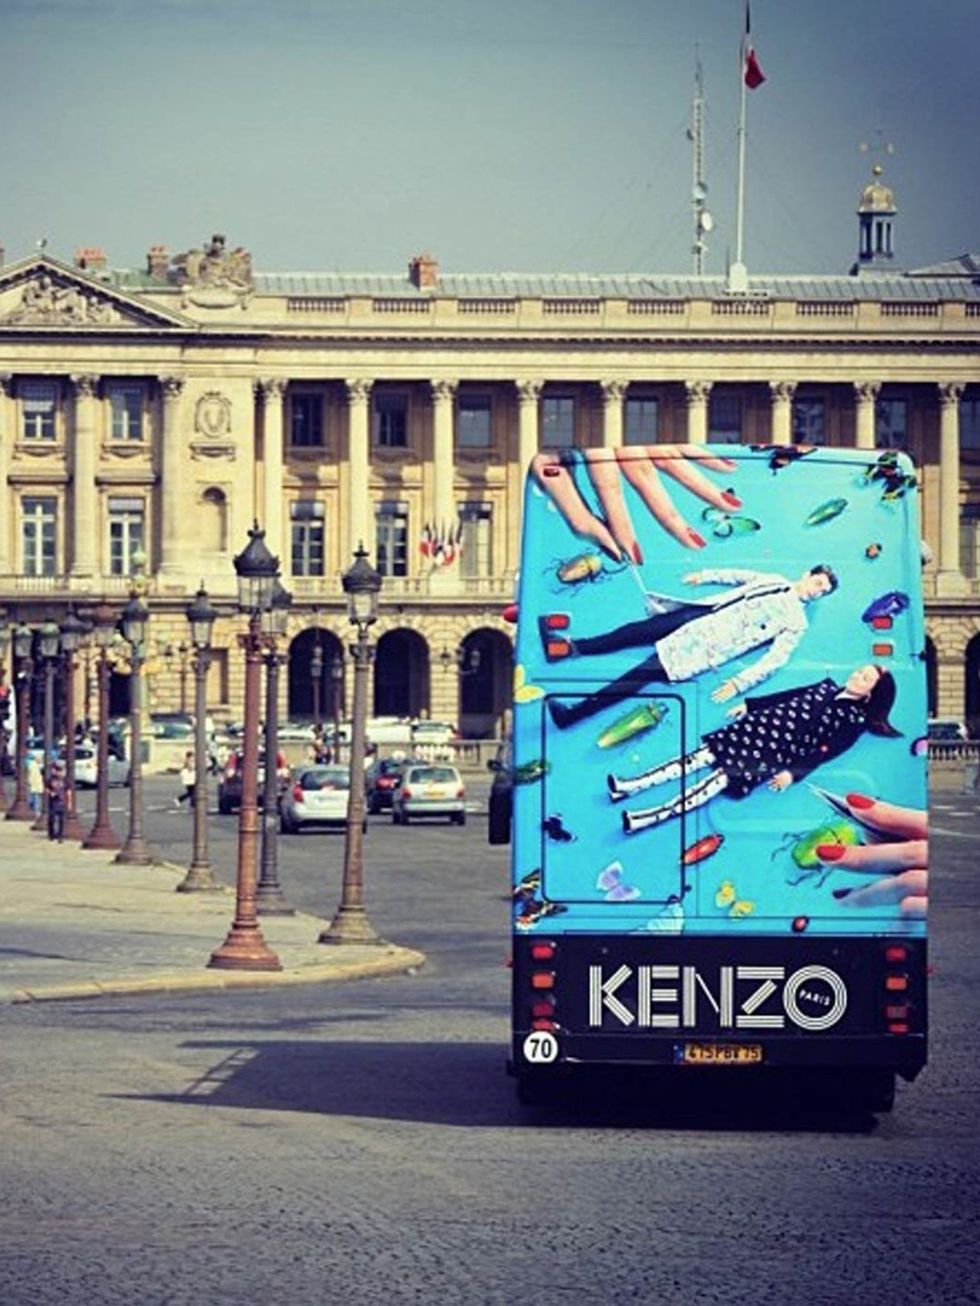 <p>Kenzo (@kenzoparis_hq)</p><p>'You know #pfw is ON when the KENZO bus hits Paris!#toiletpaper #kenzofw13'</p><p><em><a href="http://www.elleuk.com/catwalk">Latest from the catwalk</a></em></p>